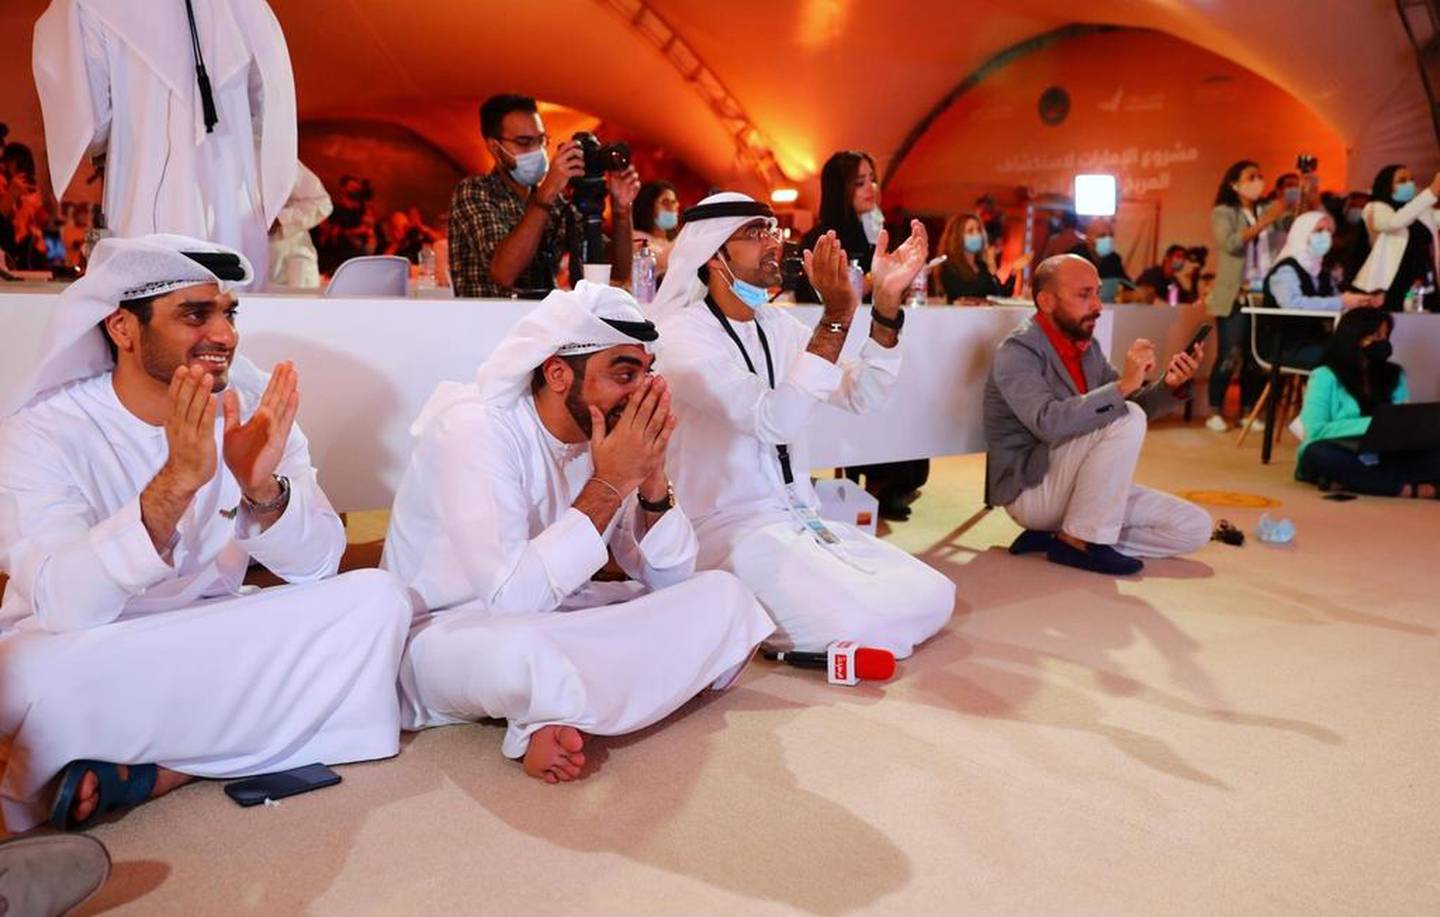 Emirati journalists at Mohammed bin Rashid Space Centre in Dubai cheer as the Hope probe is blasted into orbit just before 2am on Monday, July 20. Ahmed Jadallah / Reuters